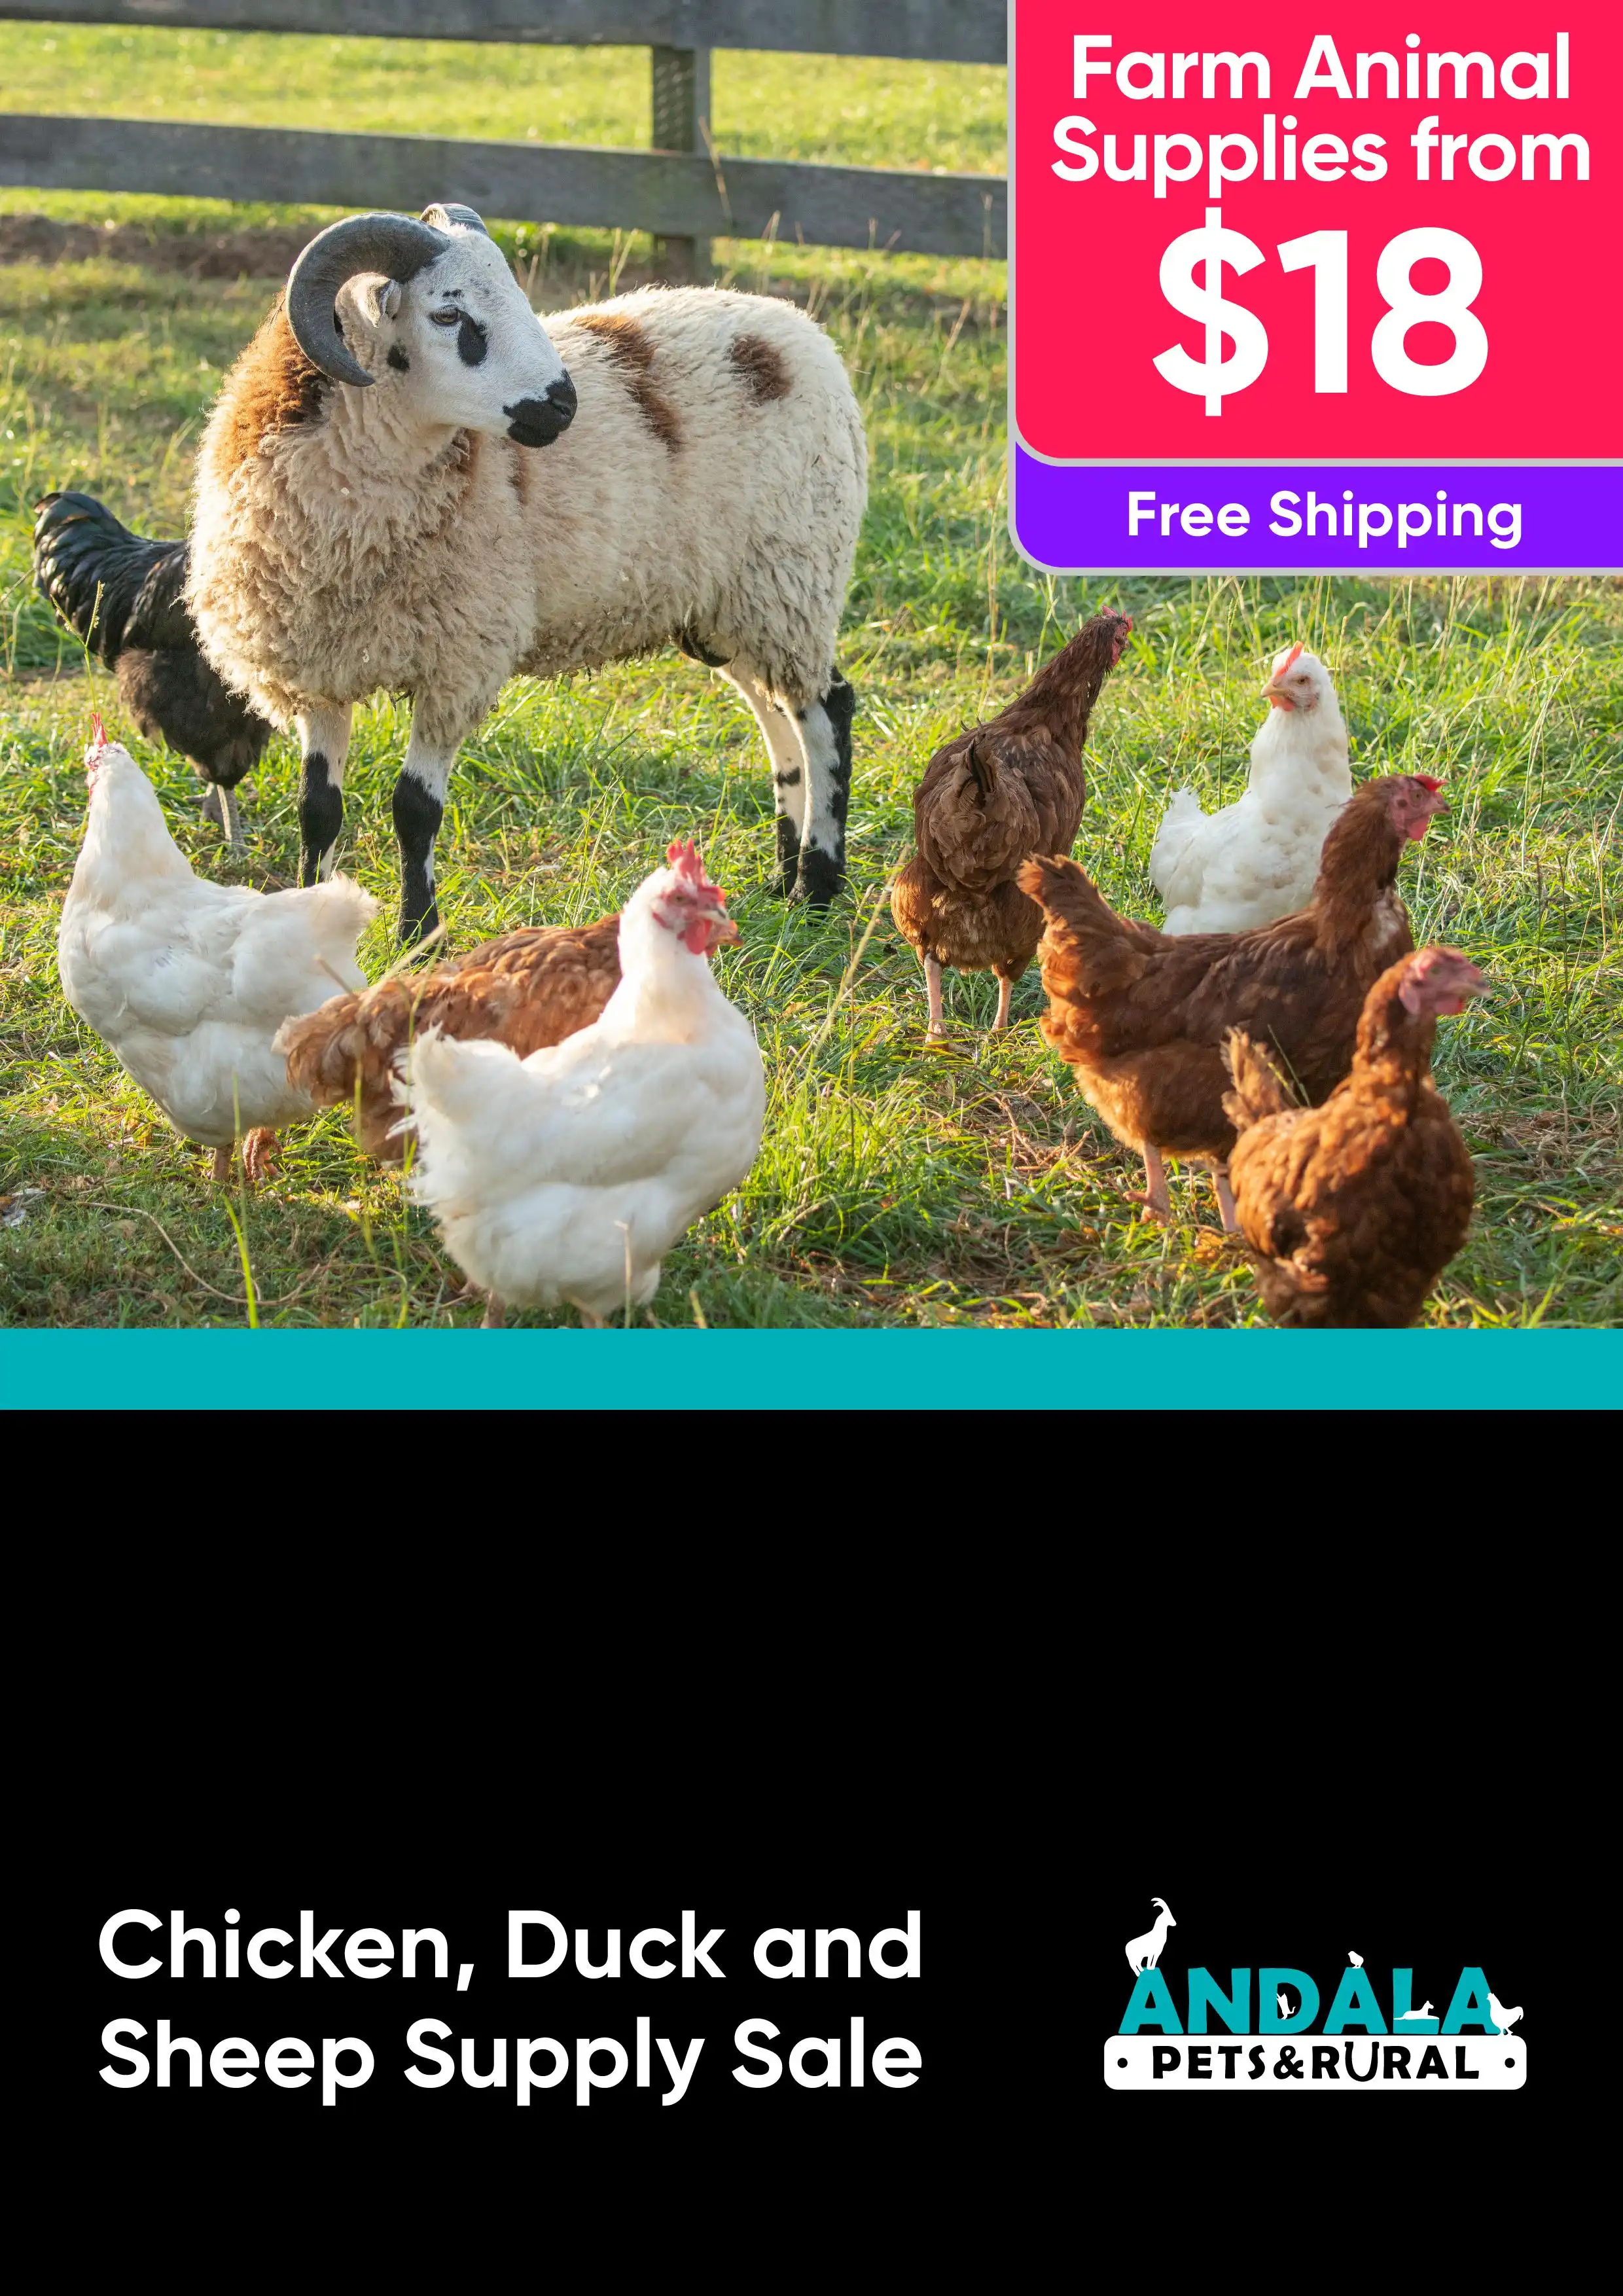 Farm Animal Pet Supply Sale for Chickens, Ducks and Sheep - specials from $18 - Free Shipping